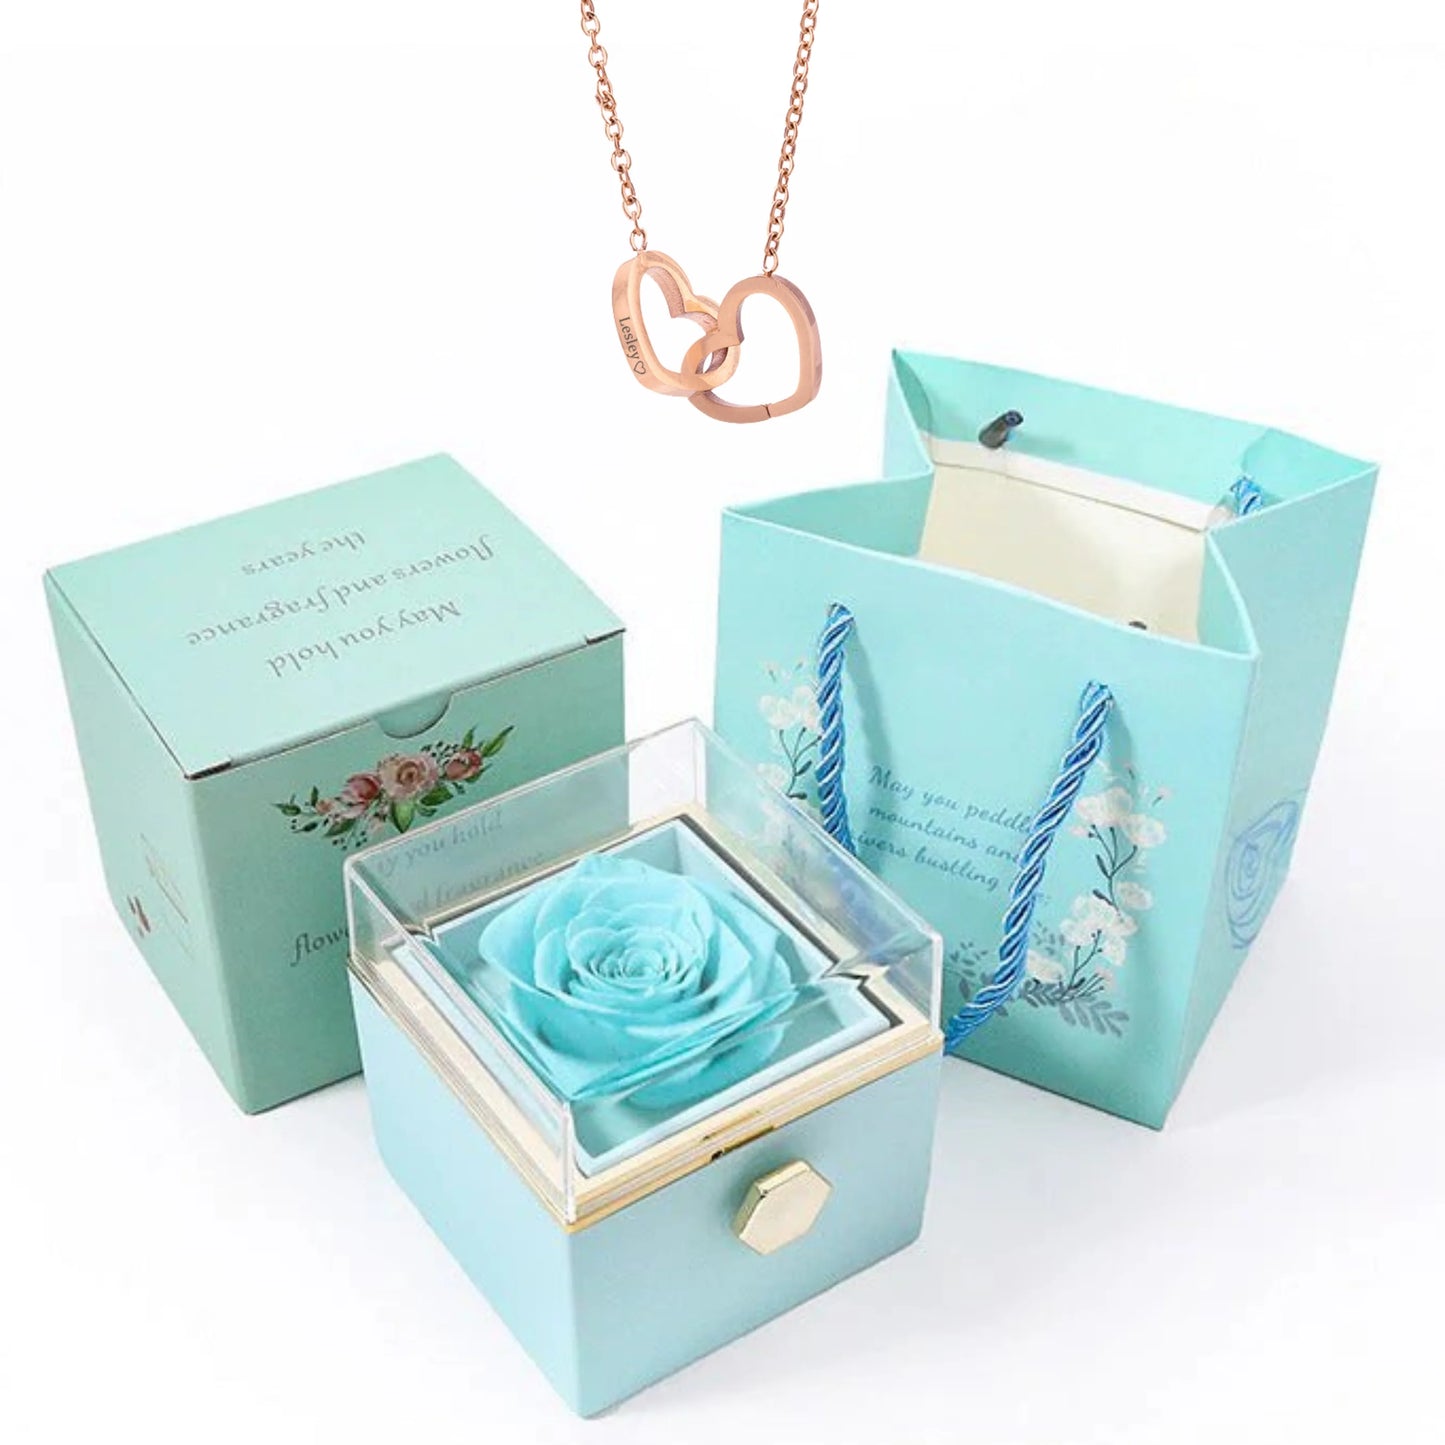 Eternally Preserved Rotating Rose Box With Engraved Heart Necklace